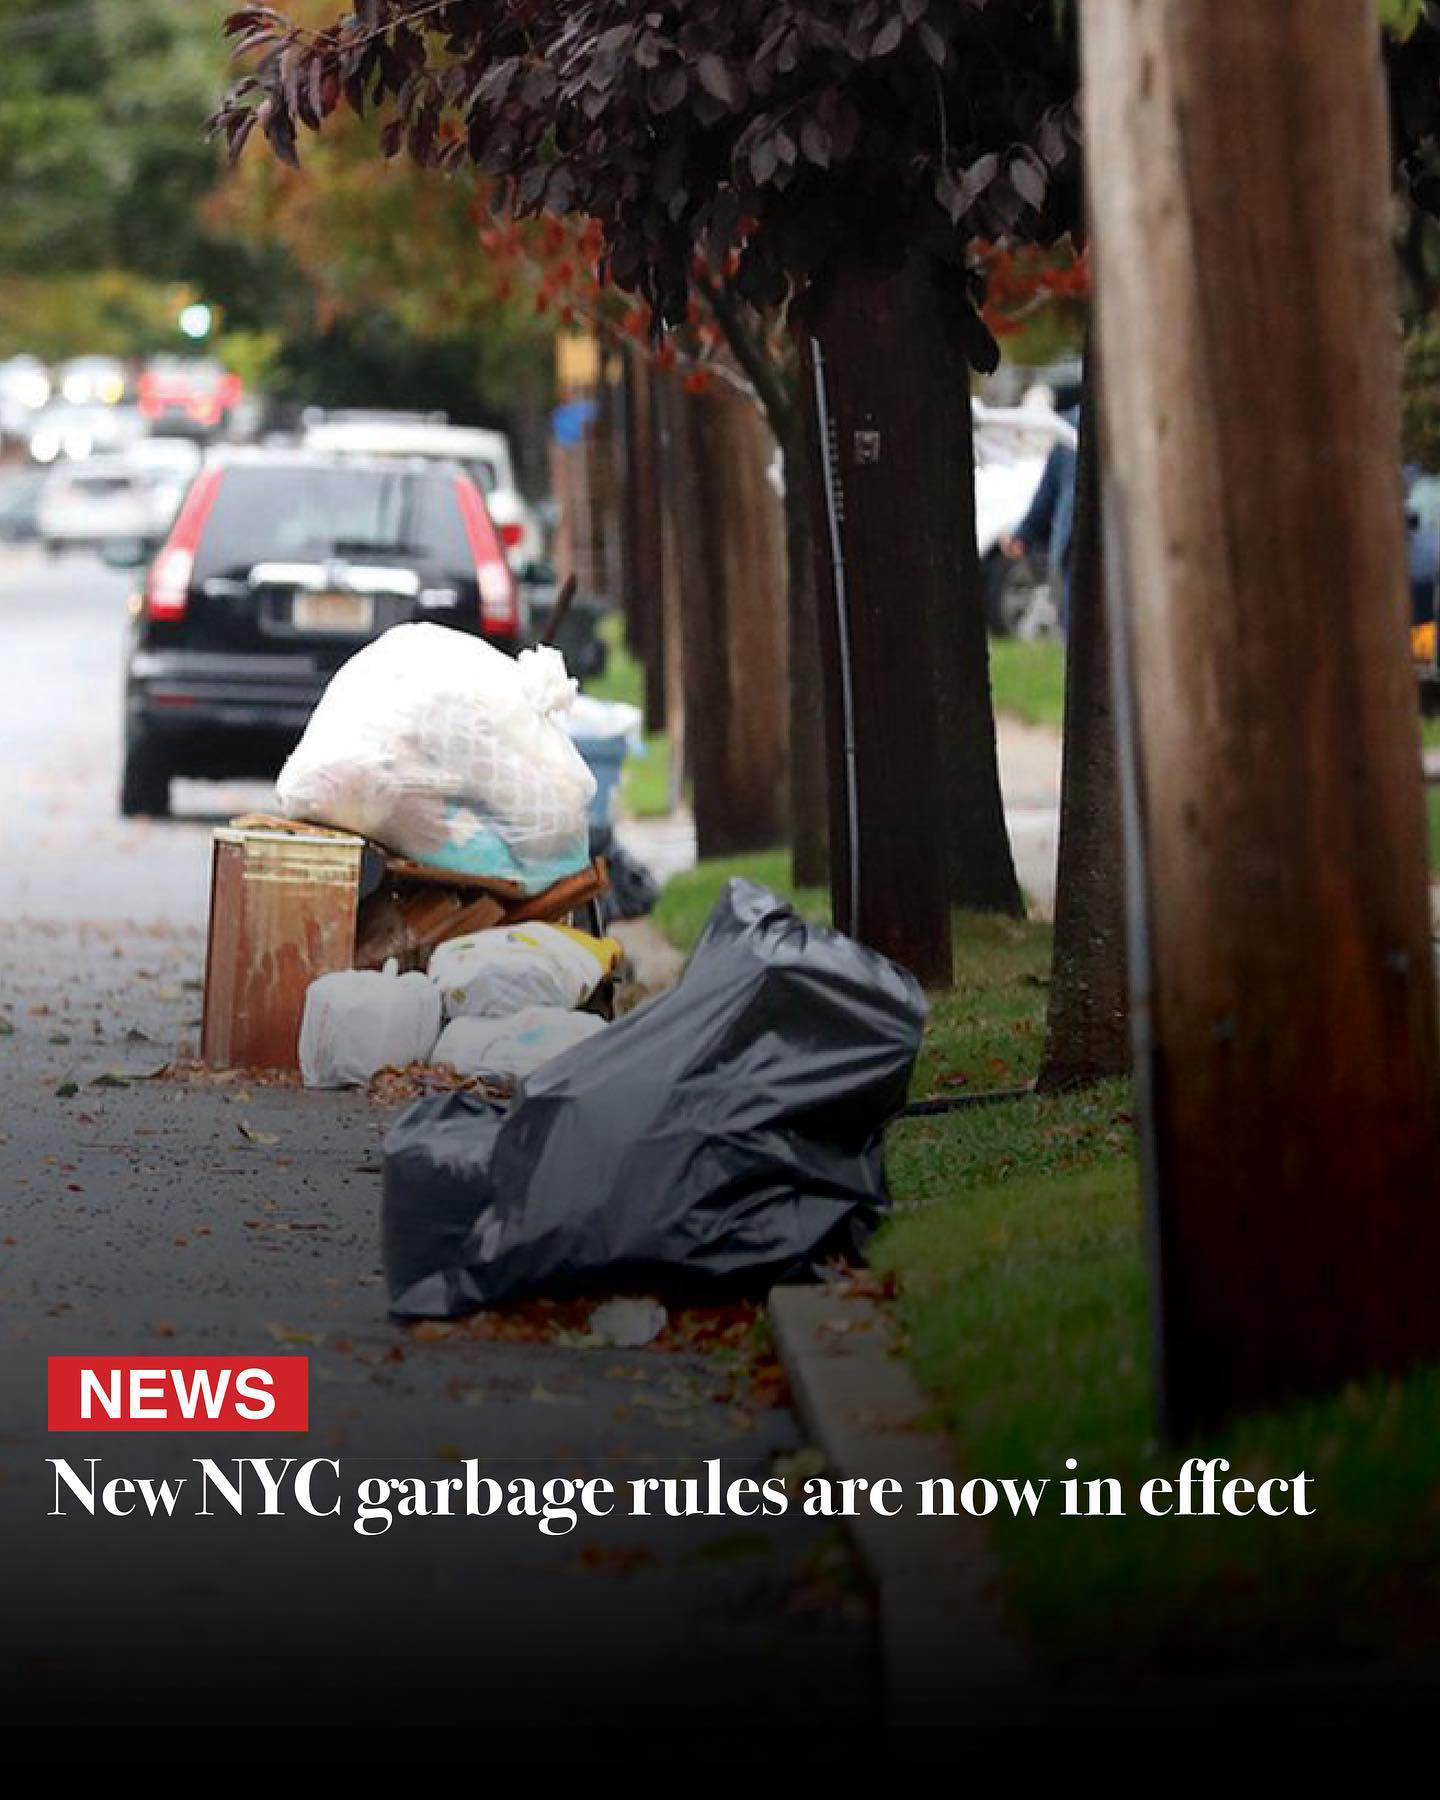 New York City has introduced new garbage rules to curb rat infestation and to make the streets clean